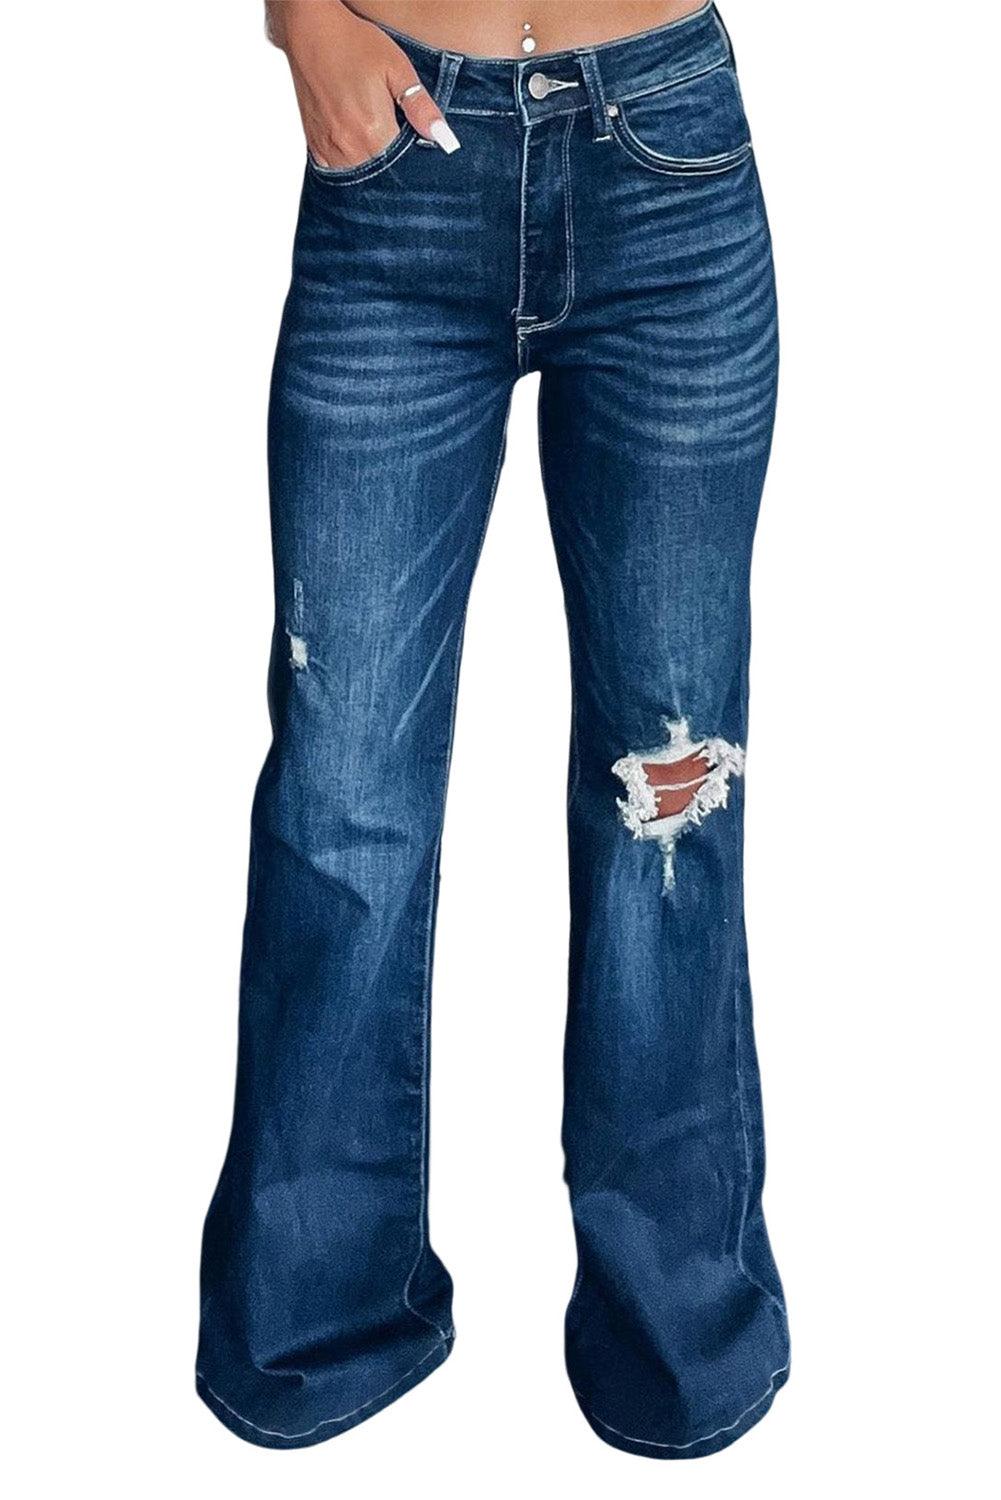 Asymmetrical Open Knee Distressed Flare Jeans - Flyclothing LLC